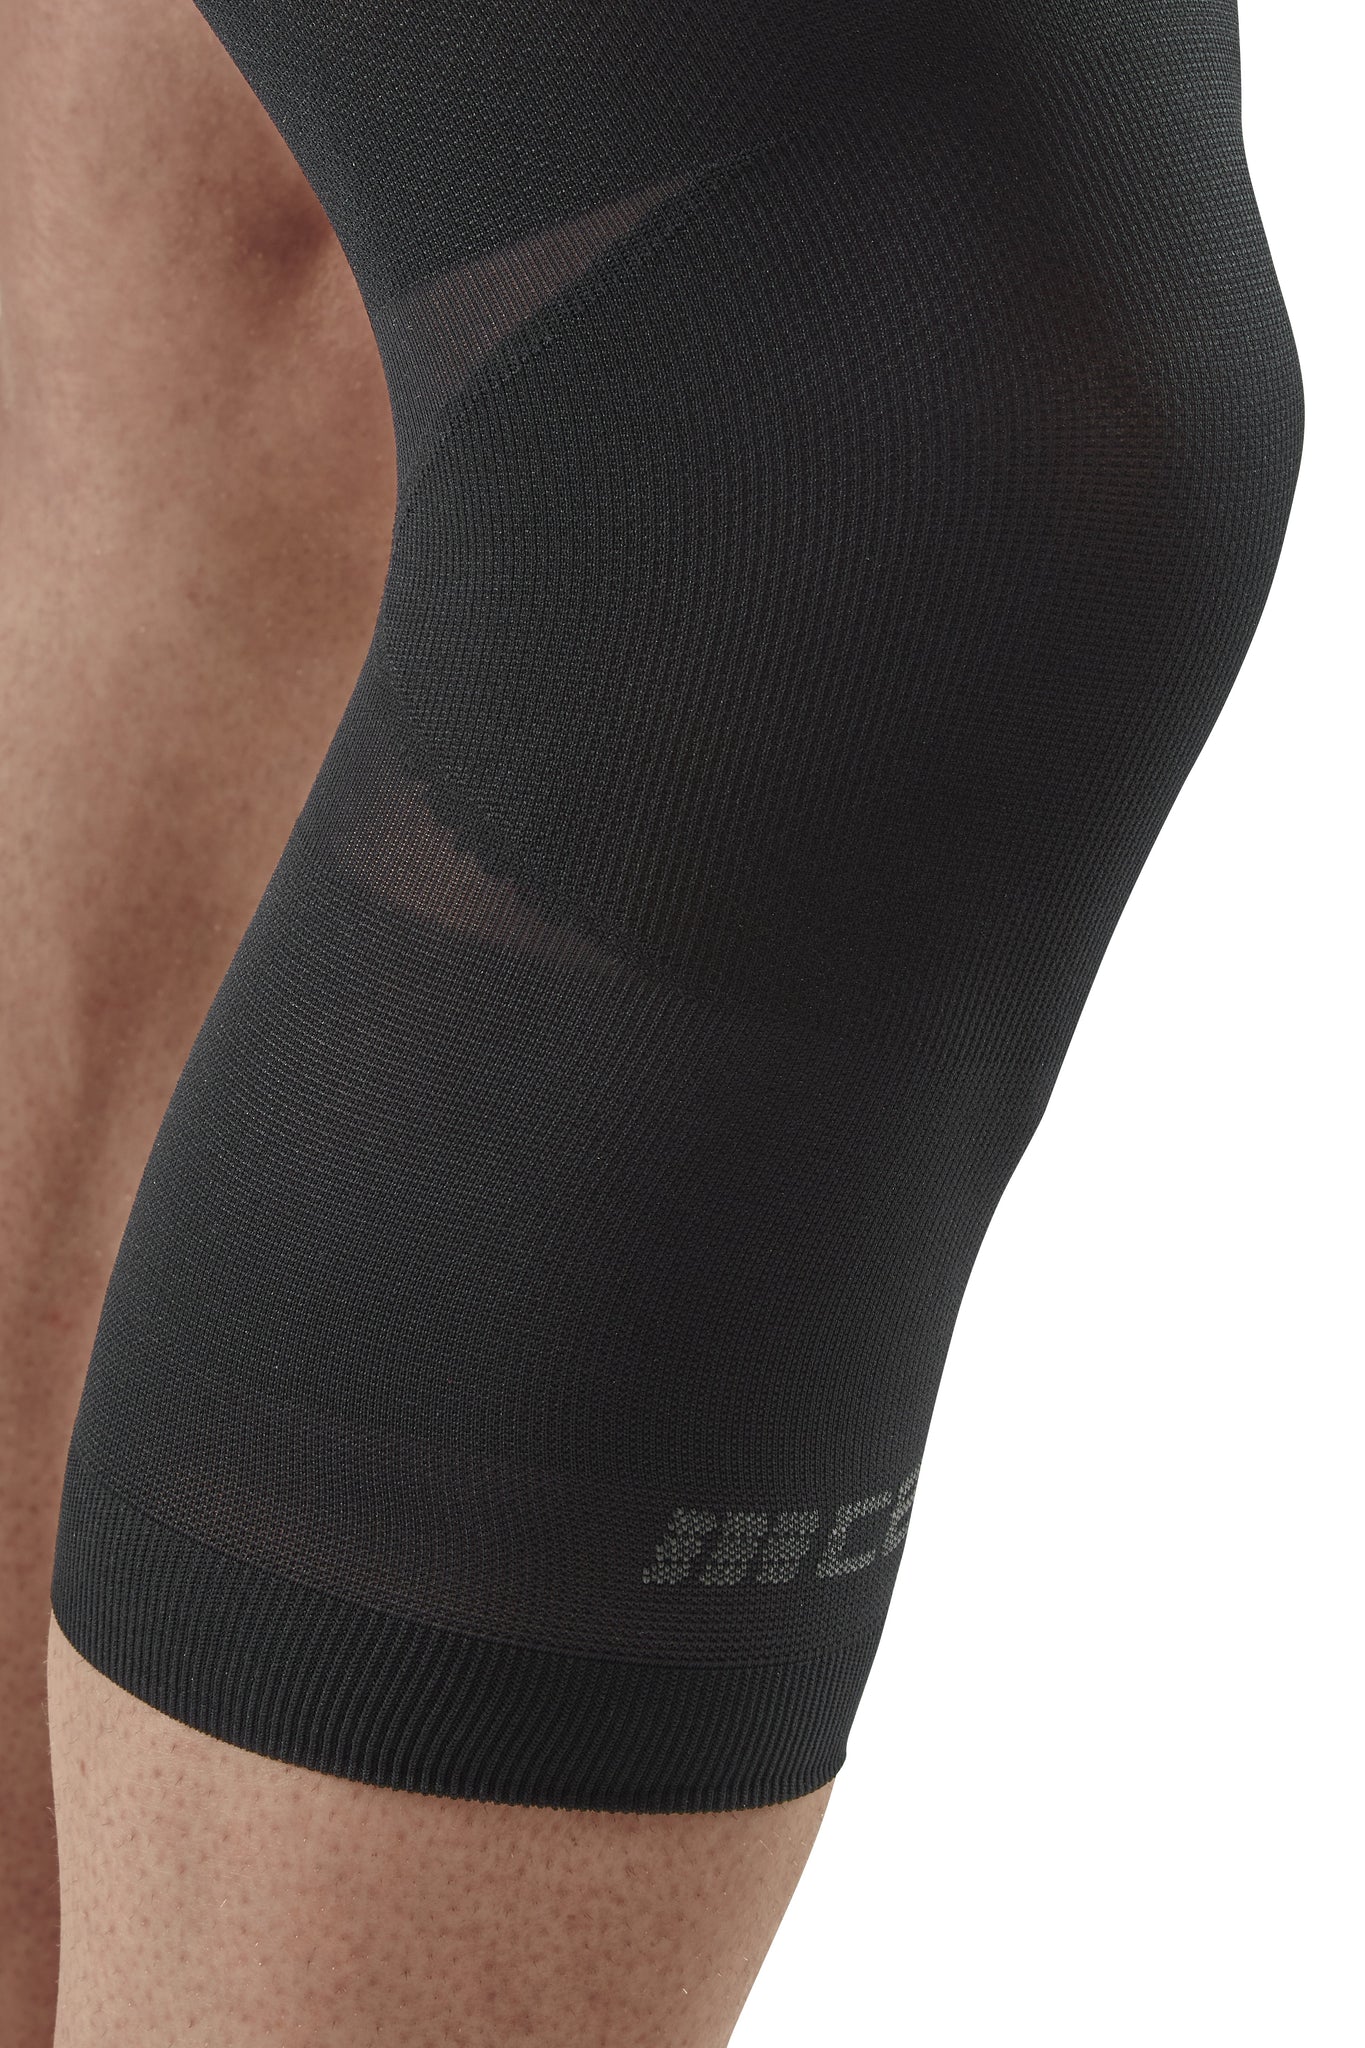 Mid & Light Support Knee Sleeve; 20-30 mmHg Compression Care